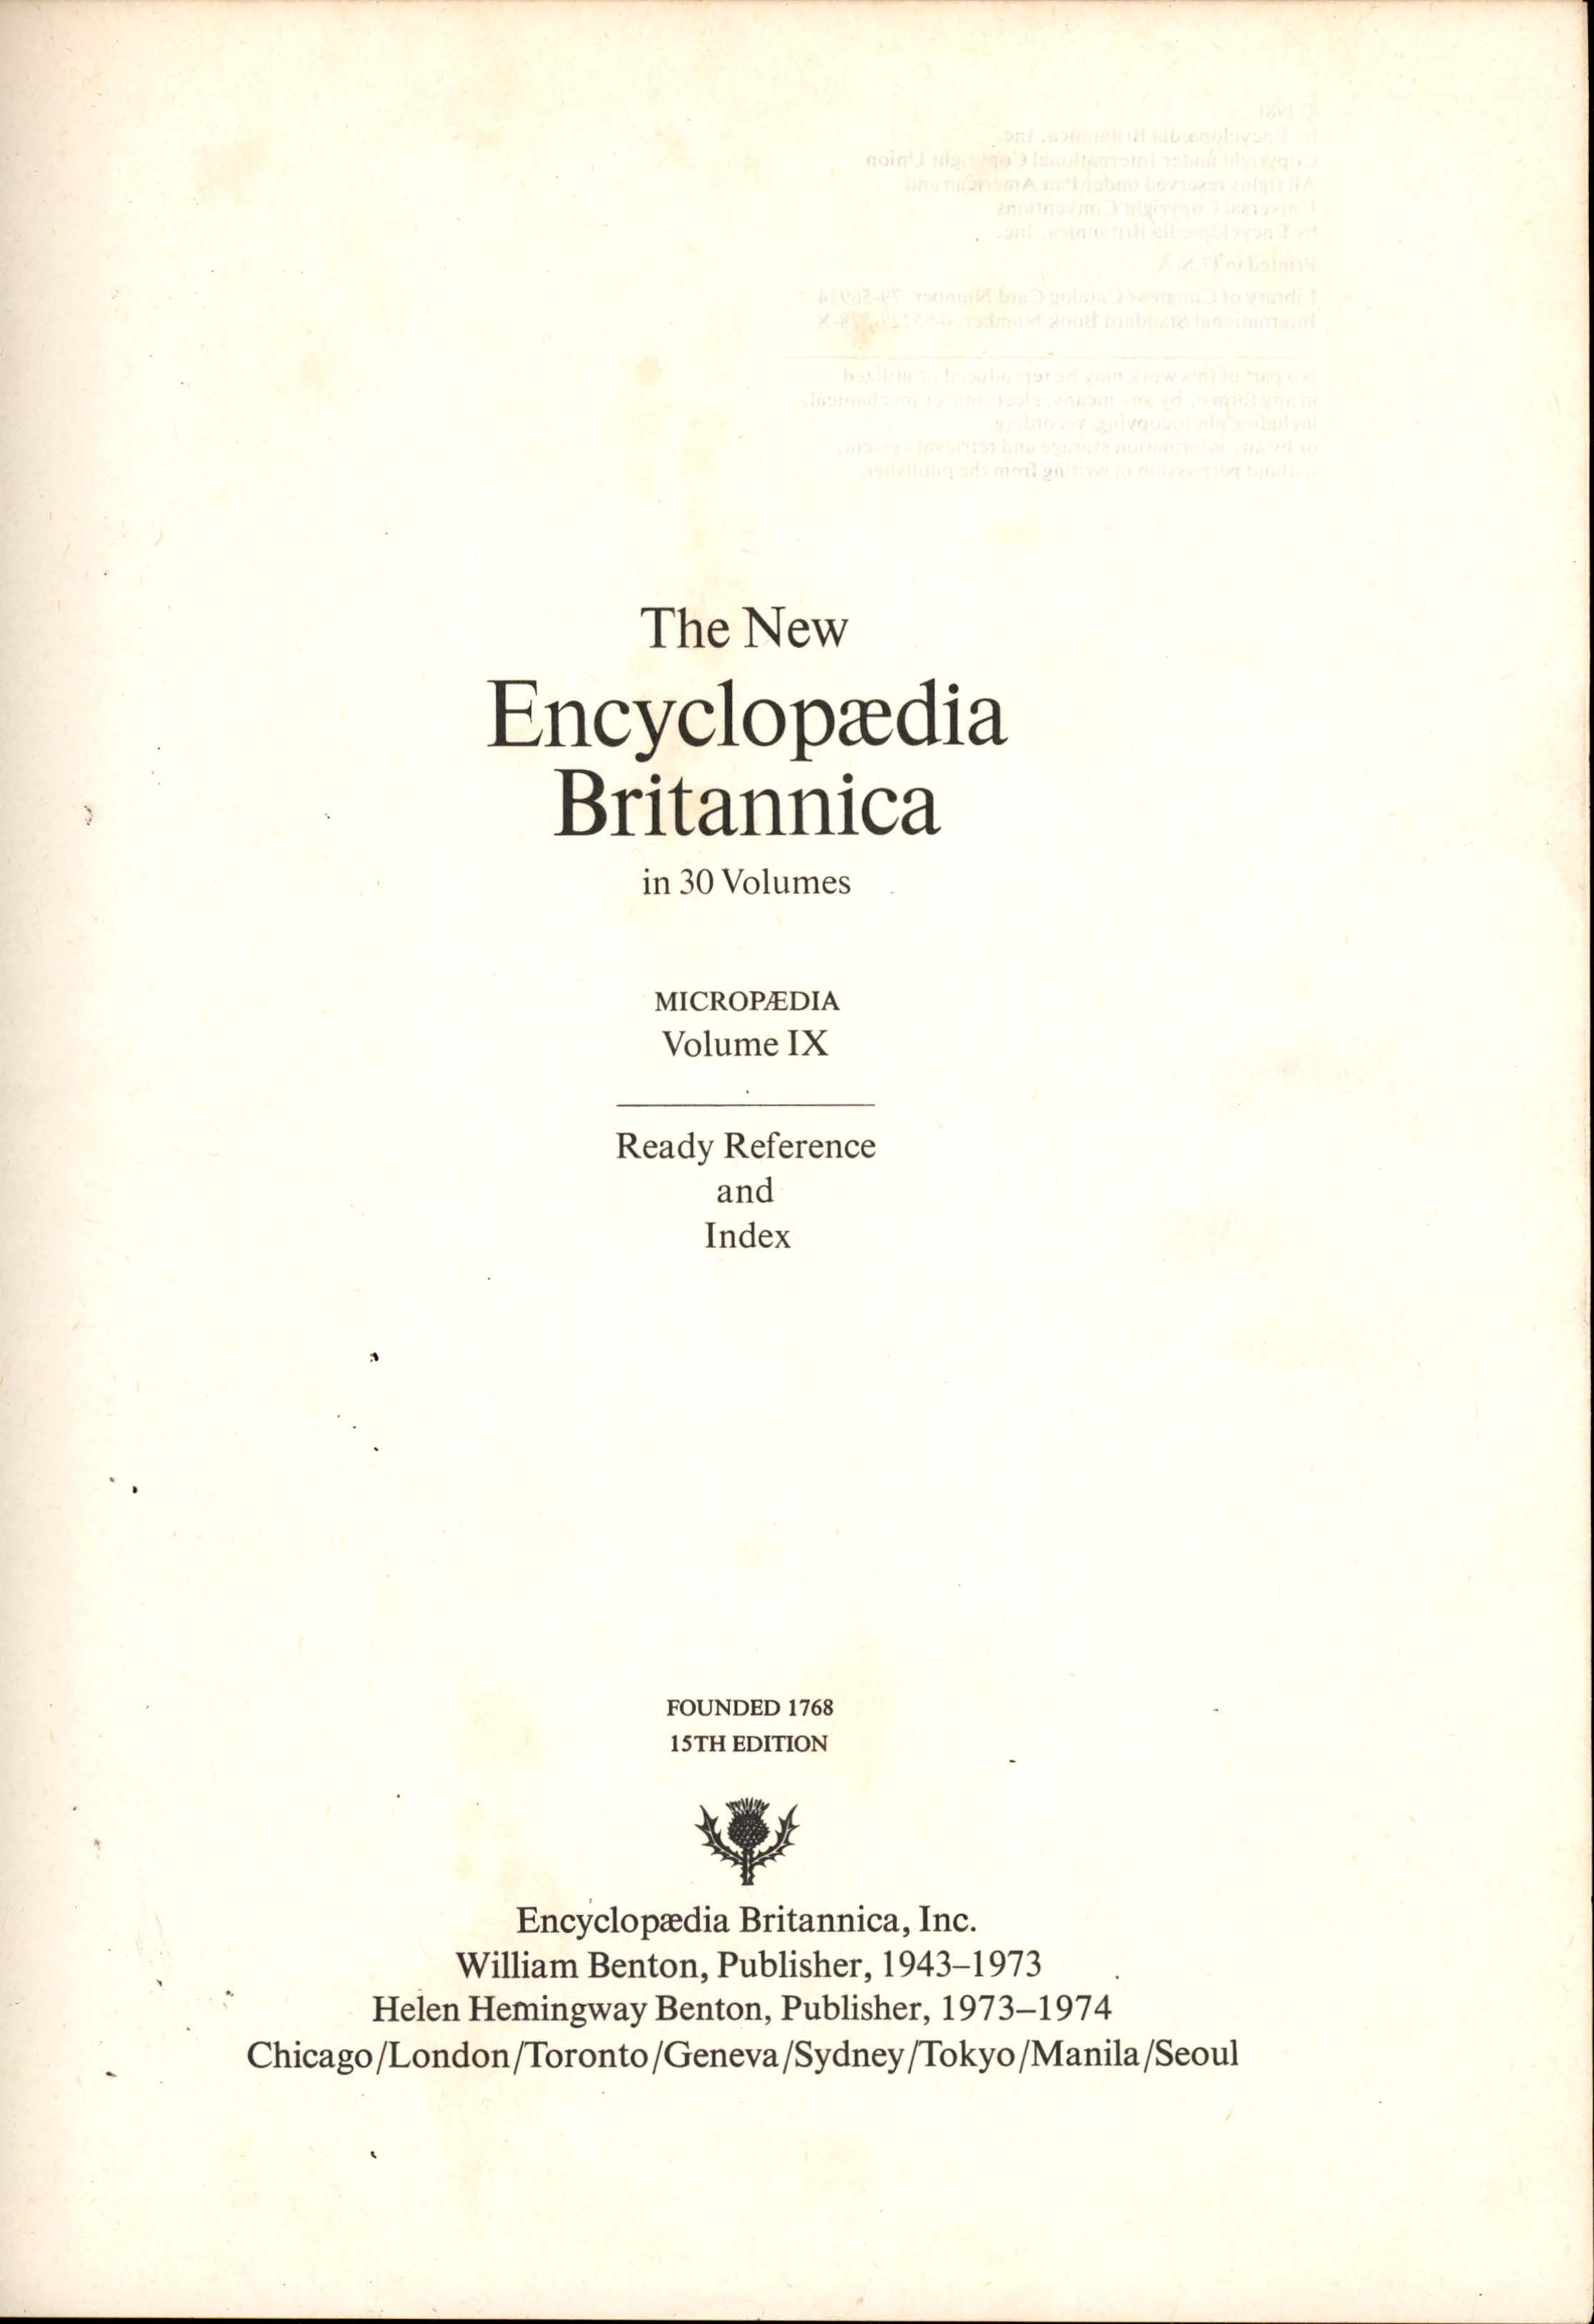 The new encyclopedia britannica : micropedia ready reference and index vol. IX